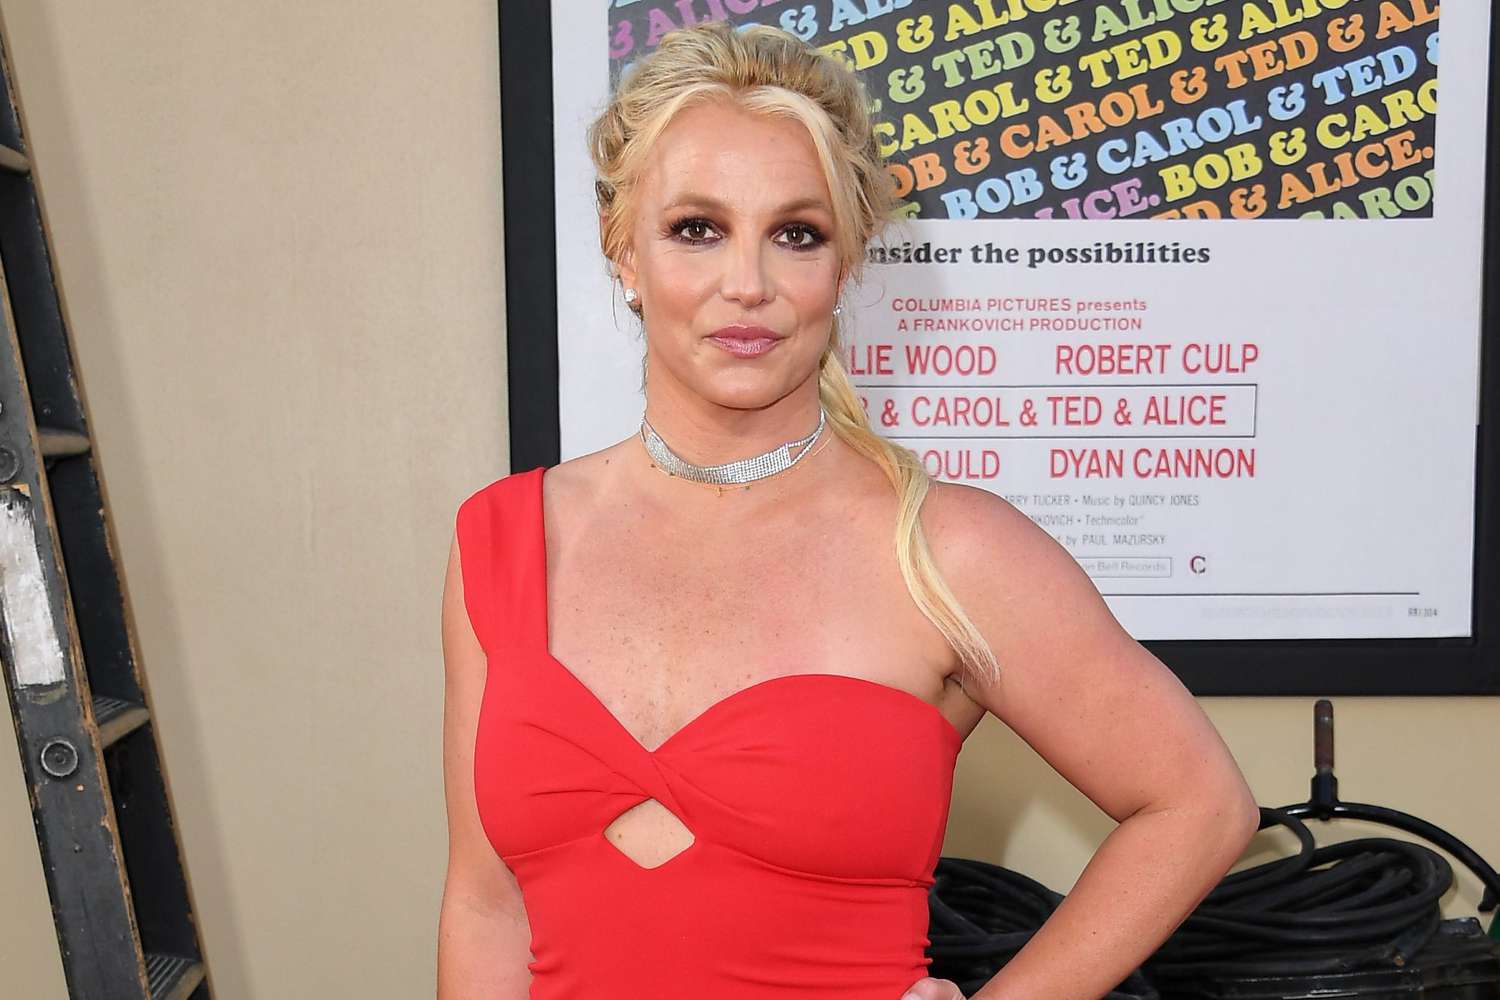 HOLLYWOOD, CALIFORNIA - JULY 22: Britney Spears arrives at the Sony Pictures' "Once Upon A Time...In Hollywood" Los Angeles Premiere on July 22, 2019 in Hollywood, California. (Photo by Steve Granitz/WireImage)